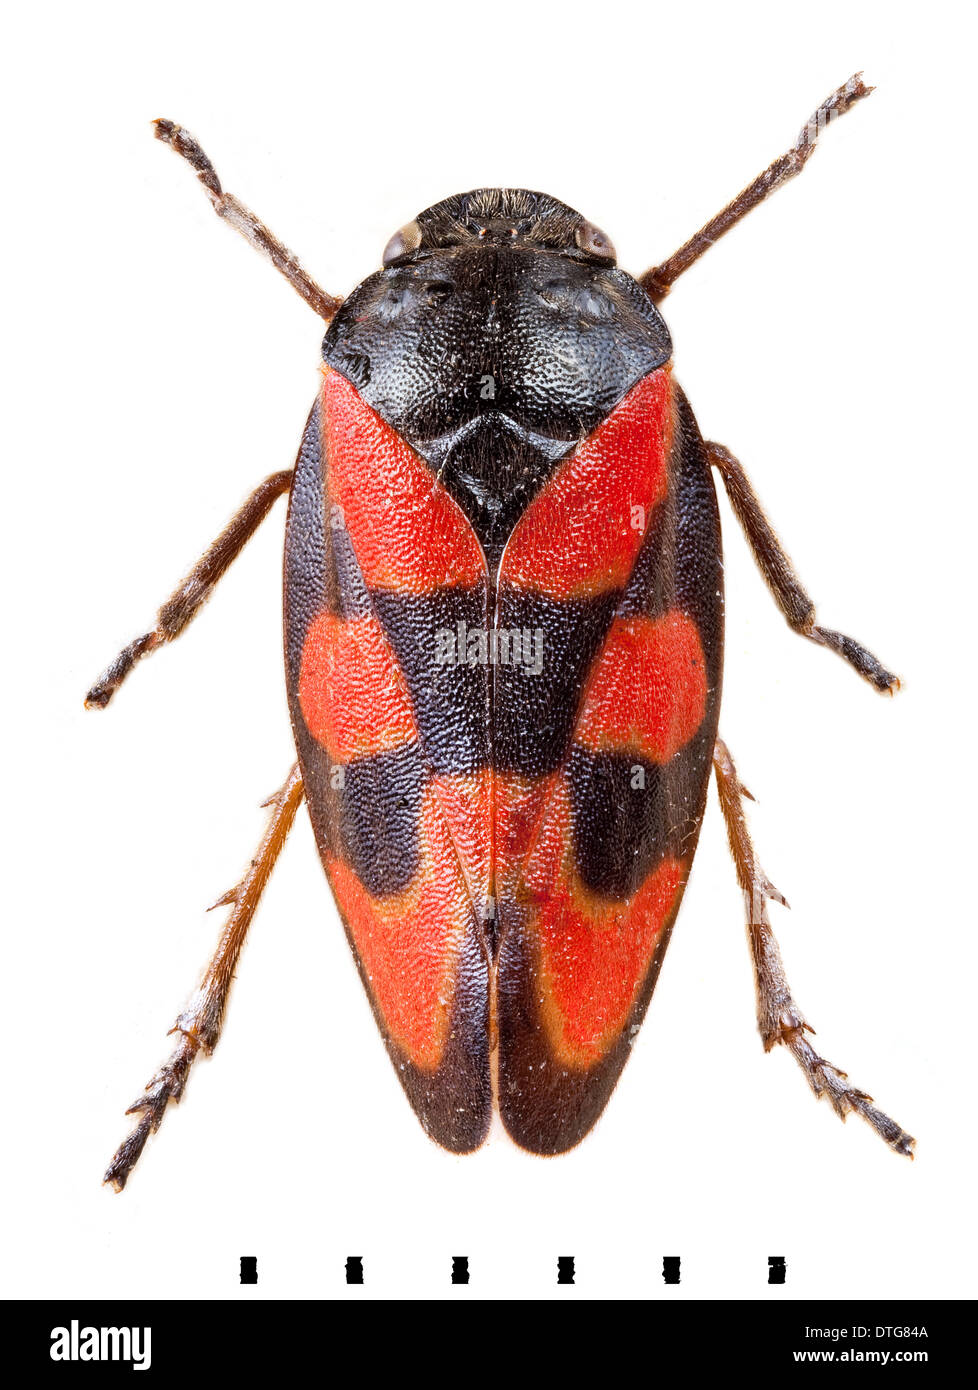 Cercopis vulnerata, Black-and-red froghopper Stock Photo